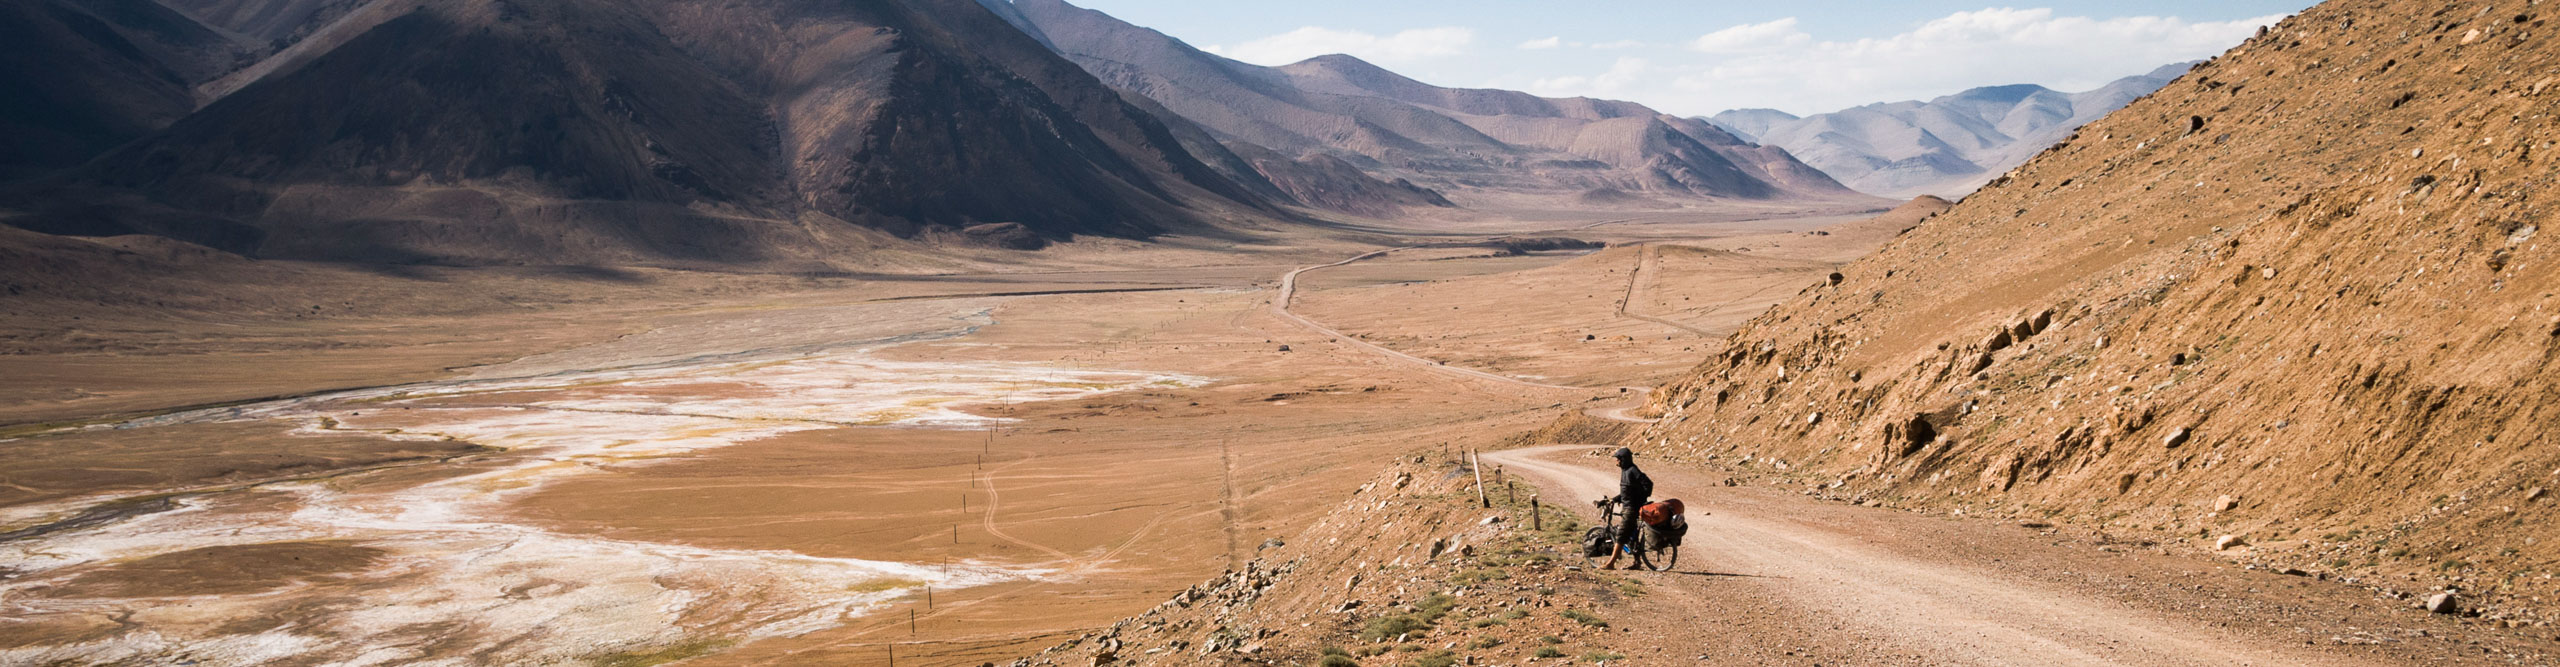 A cyclist on a journey looking at the scenery of the Pamirs of Tajikistan, after the Ak-Baital pass 